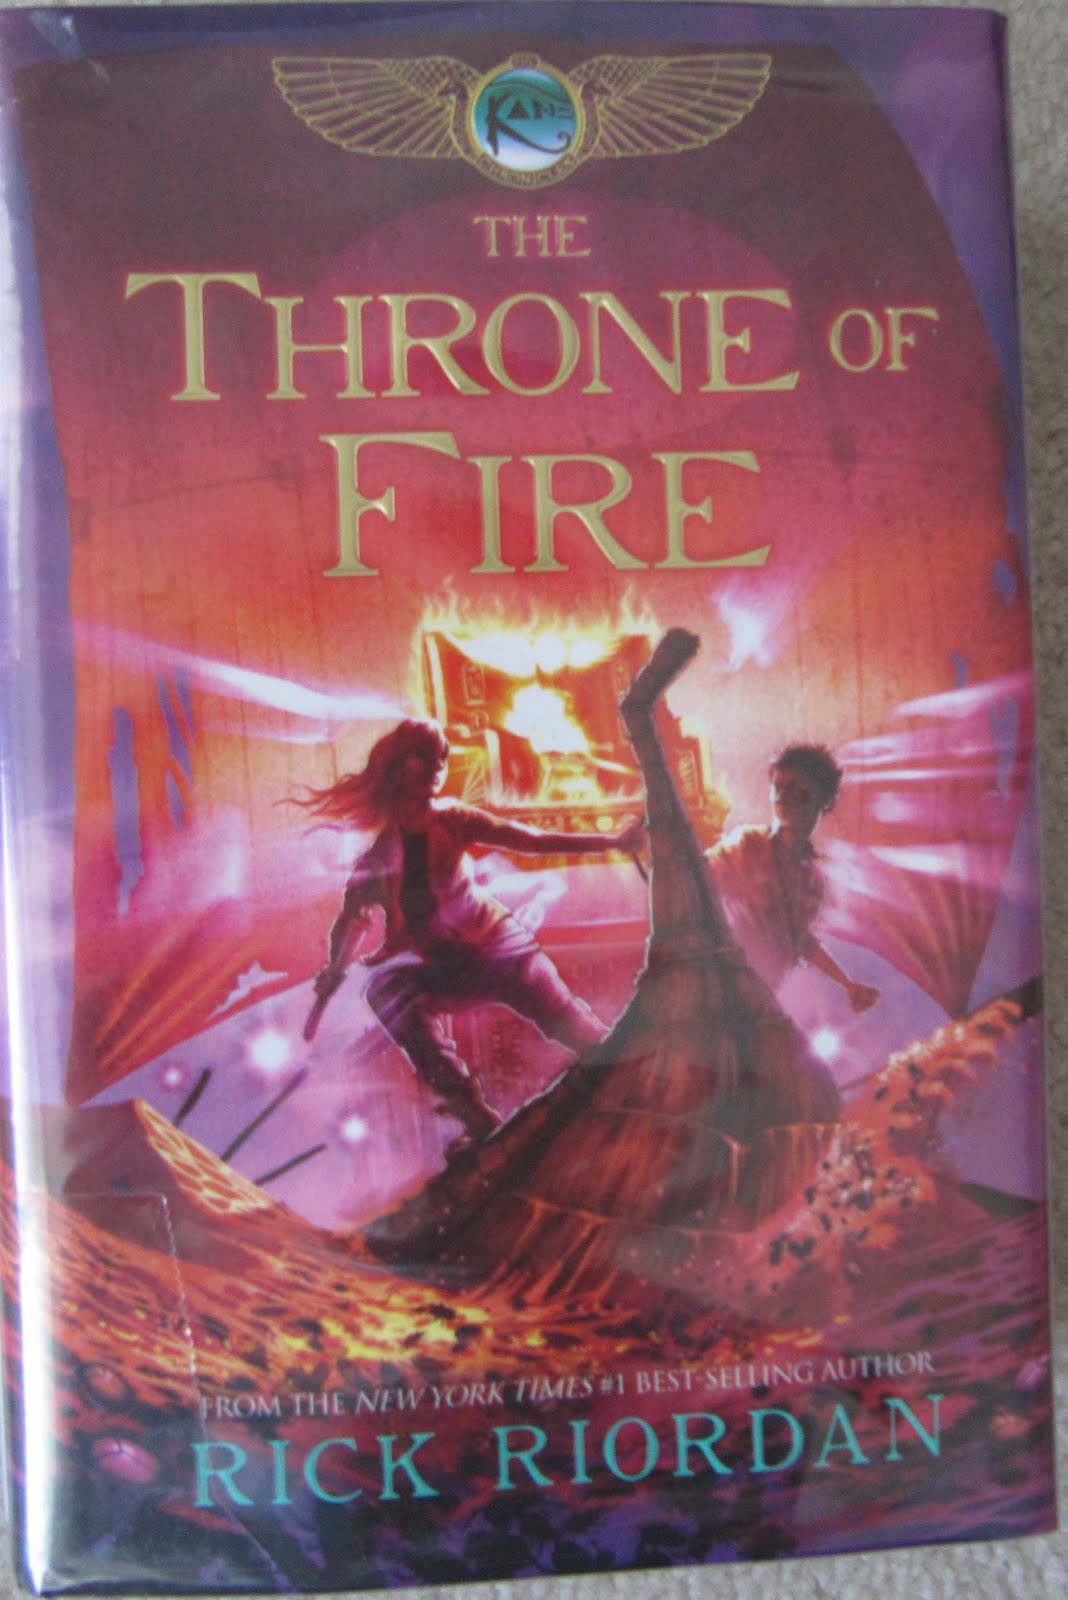 My Book A Day: The Throne of Fire